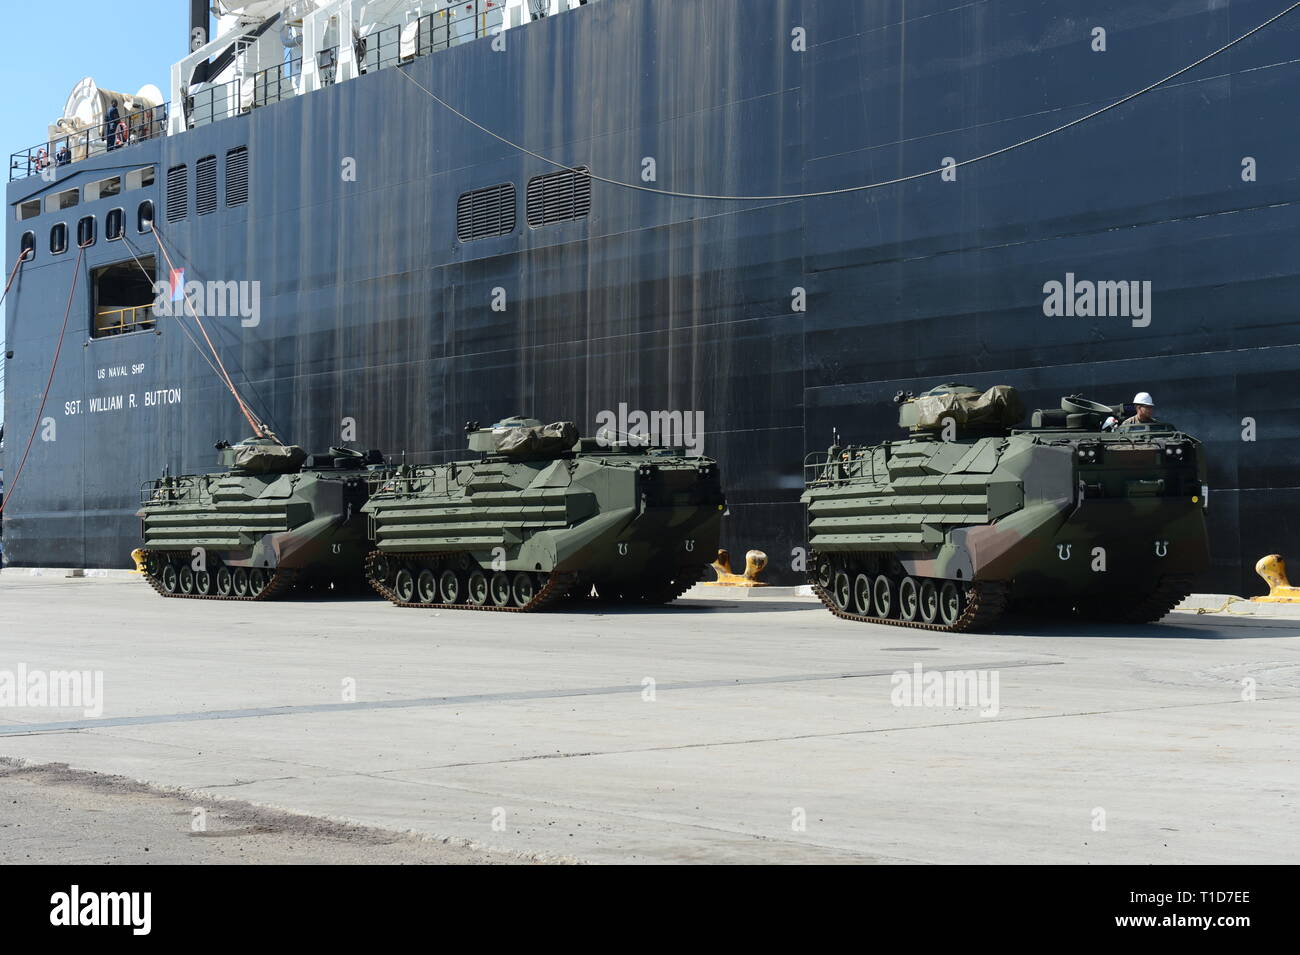 190318-N-MW964-1108 PORT HUENEME, Calif. (Mar. 13, 2019) Three amphibious assault vehicles (AAV-7A1) are offloaded from Military Sealift Command vessel USNS SGT William R. Button (T-AK 3012) in a maritime prepositioning force training evolution in Port Hueneme, California during Exercise Pacific Blitz 2019 (PacBlitz19). The inherently dynamic, scalable, and combined-arms capability of MAGTFs joined with mobility and sustainability provided by amphibious ships gives us an asymmetric advantage over adversaries.  PacBlitz19 increases the ability of all participants to plan, communicate and conduc Stock Photo